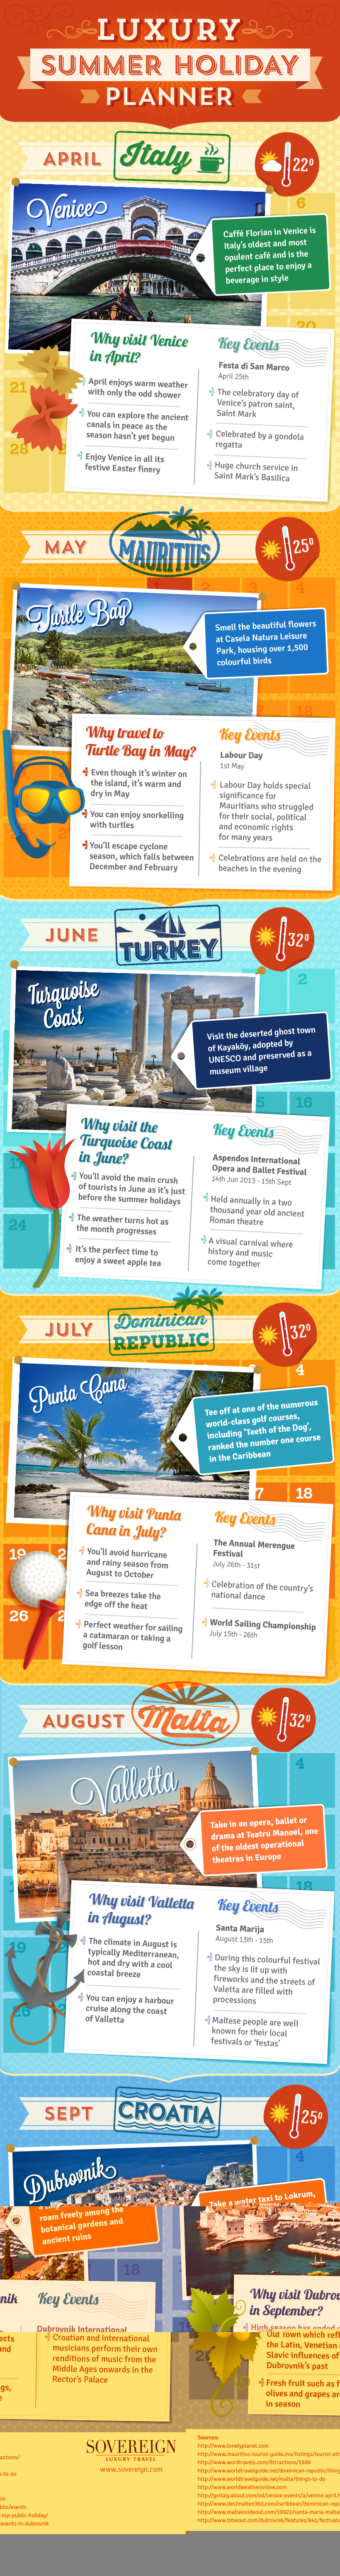 Luxury Holiday Planner - Sovereign [infographic]